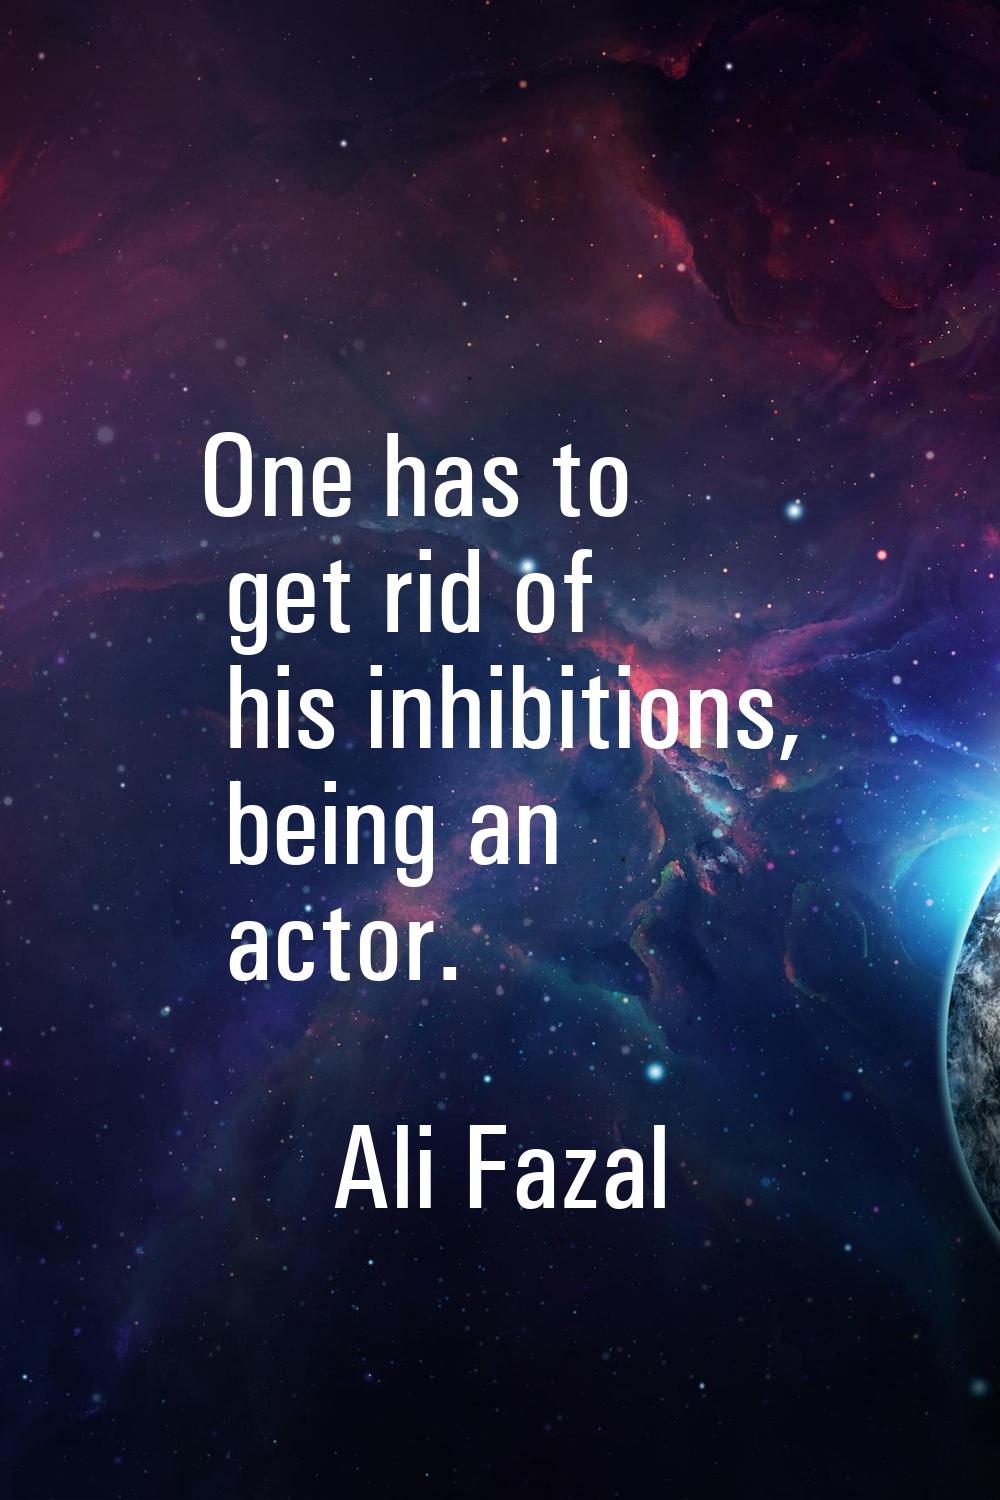 One has to get rid of his inhibitions, being an actor.